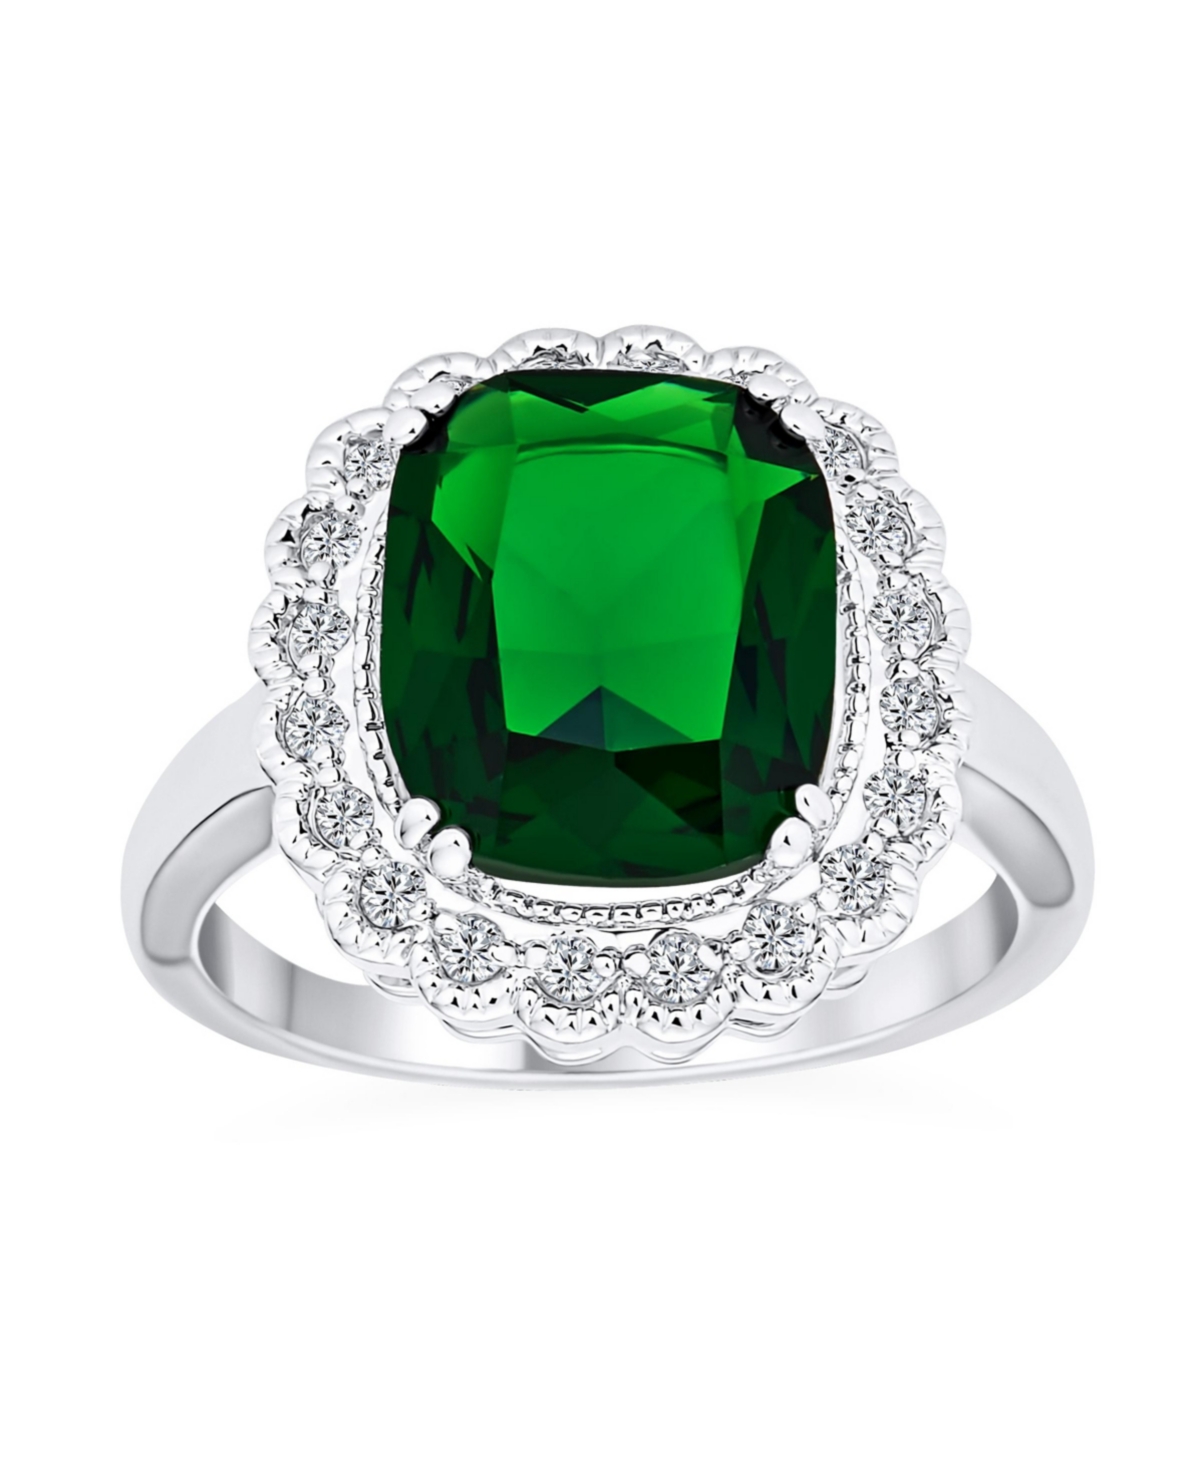 Fashion Rectangle Large Solitaire Aaa Cz Pave Simulated Green Emerald Cut Art Deco Style 10CT Cocktail Statement Ring For Women - Light